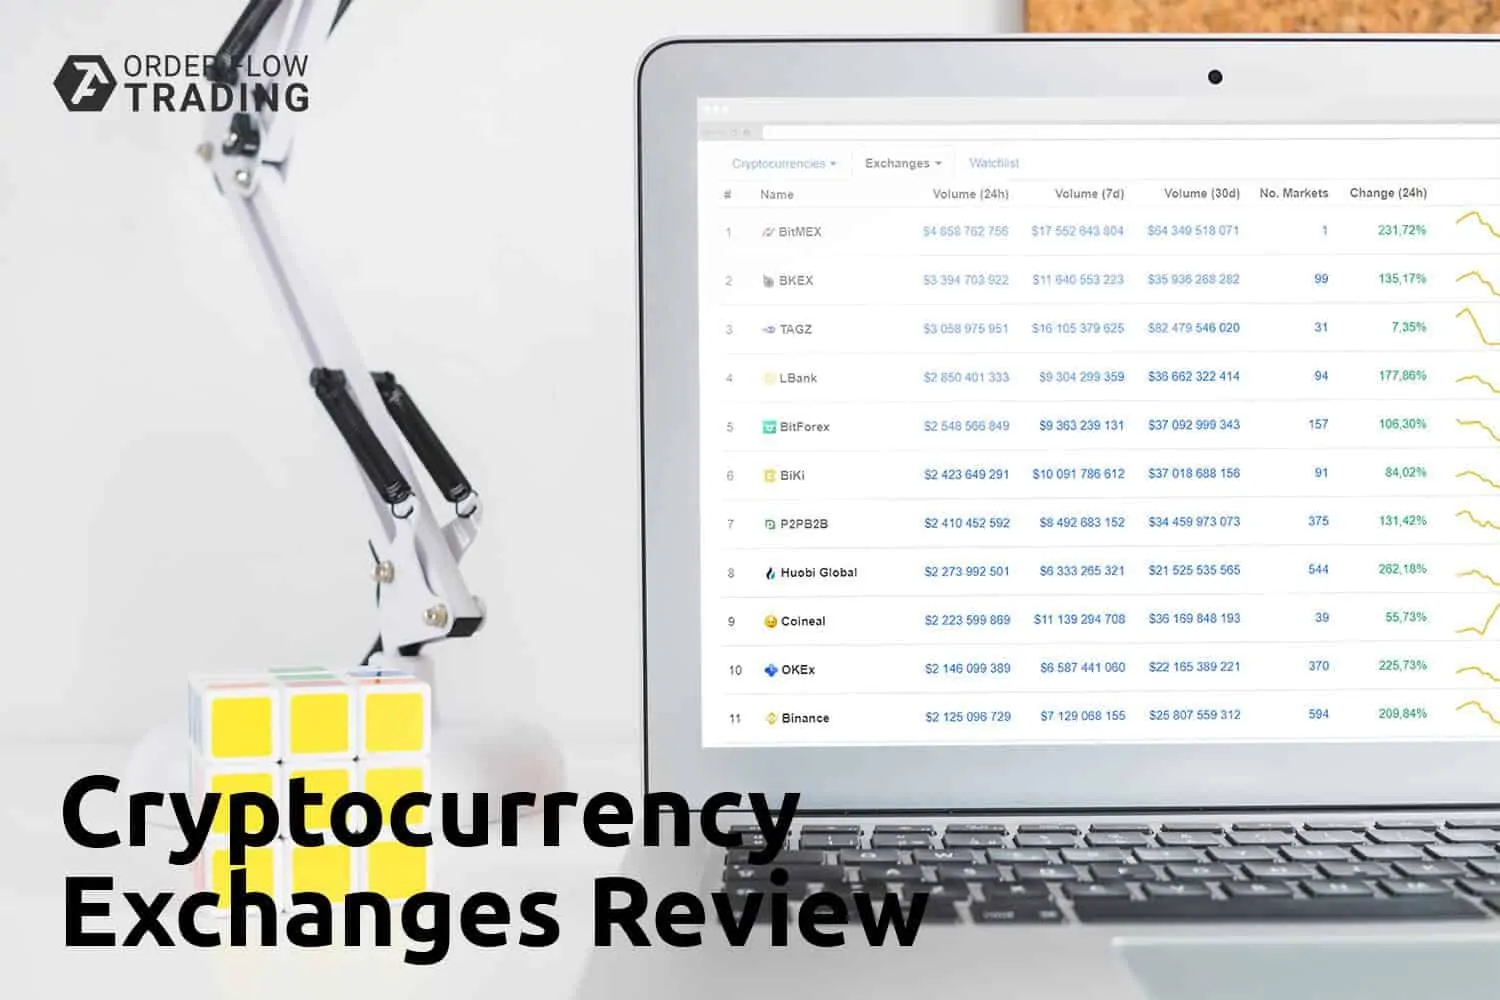 Review of the top 9 cryptocurrency exchanges